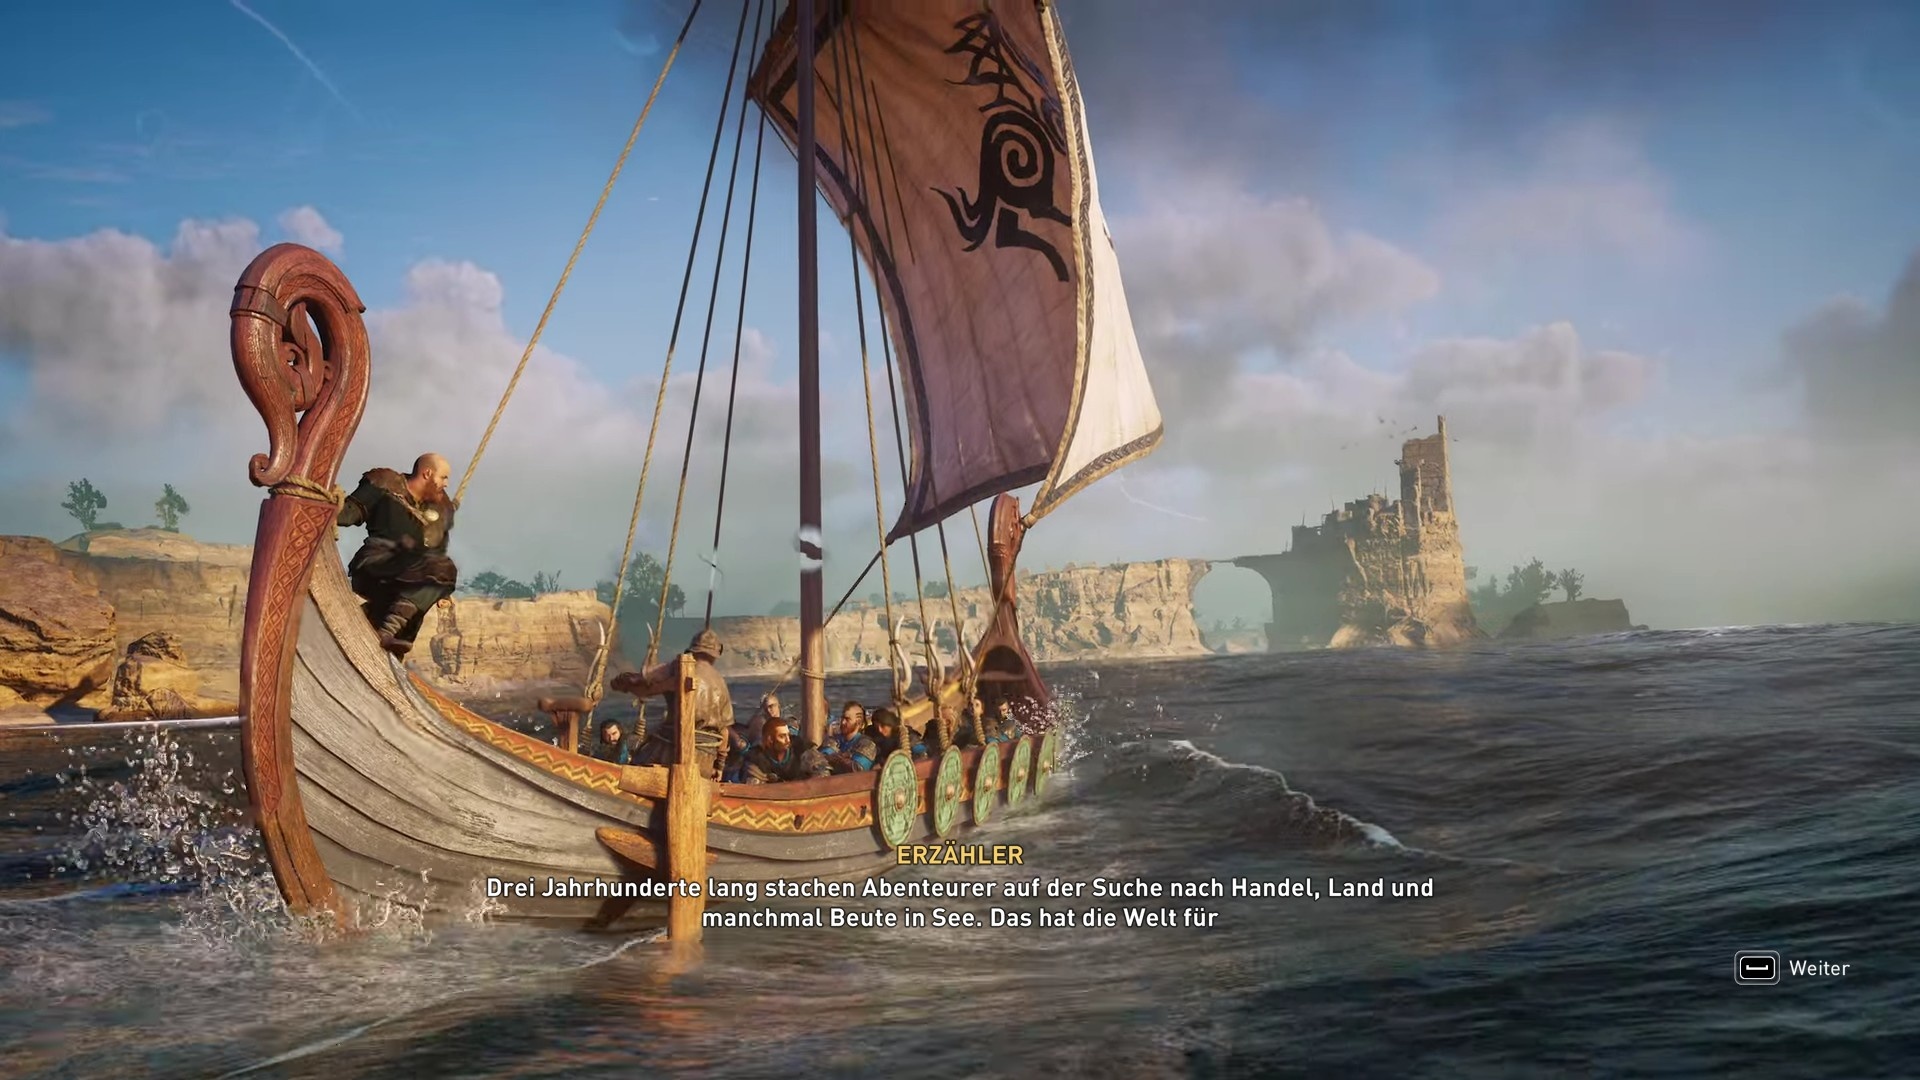 (The Discovery Tour is an interactive museum that introduces us to the historical Vikings in the 9th century in the game world. The mode came into the game as a free update. Those who don't own Valhalla and are still eager to learn will pay 20 euros.)